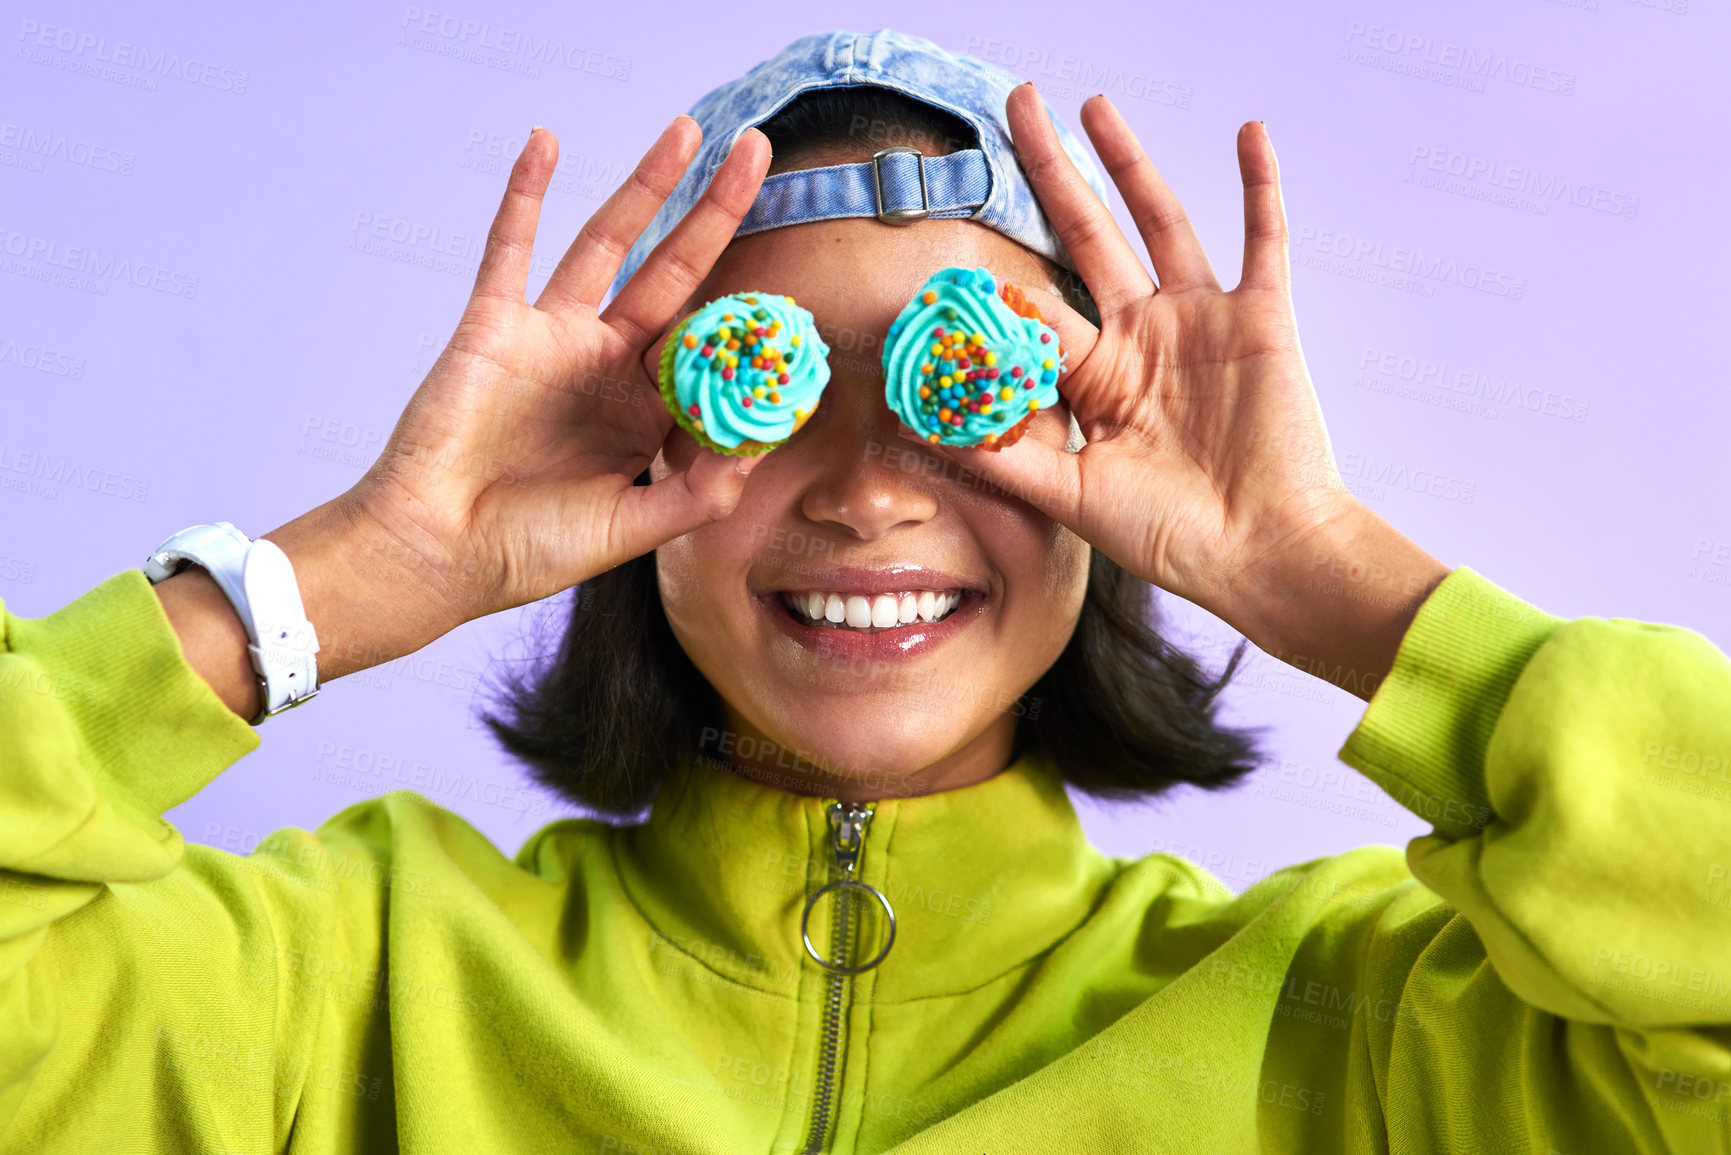 Buy stock photo Studio shot of a young woman holding cupcakes over her eyes against a purple background